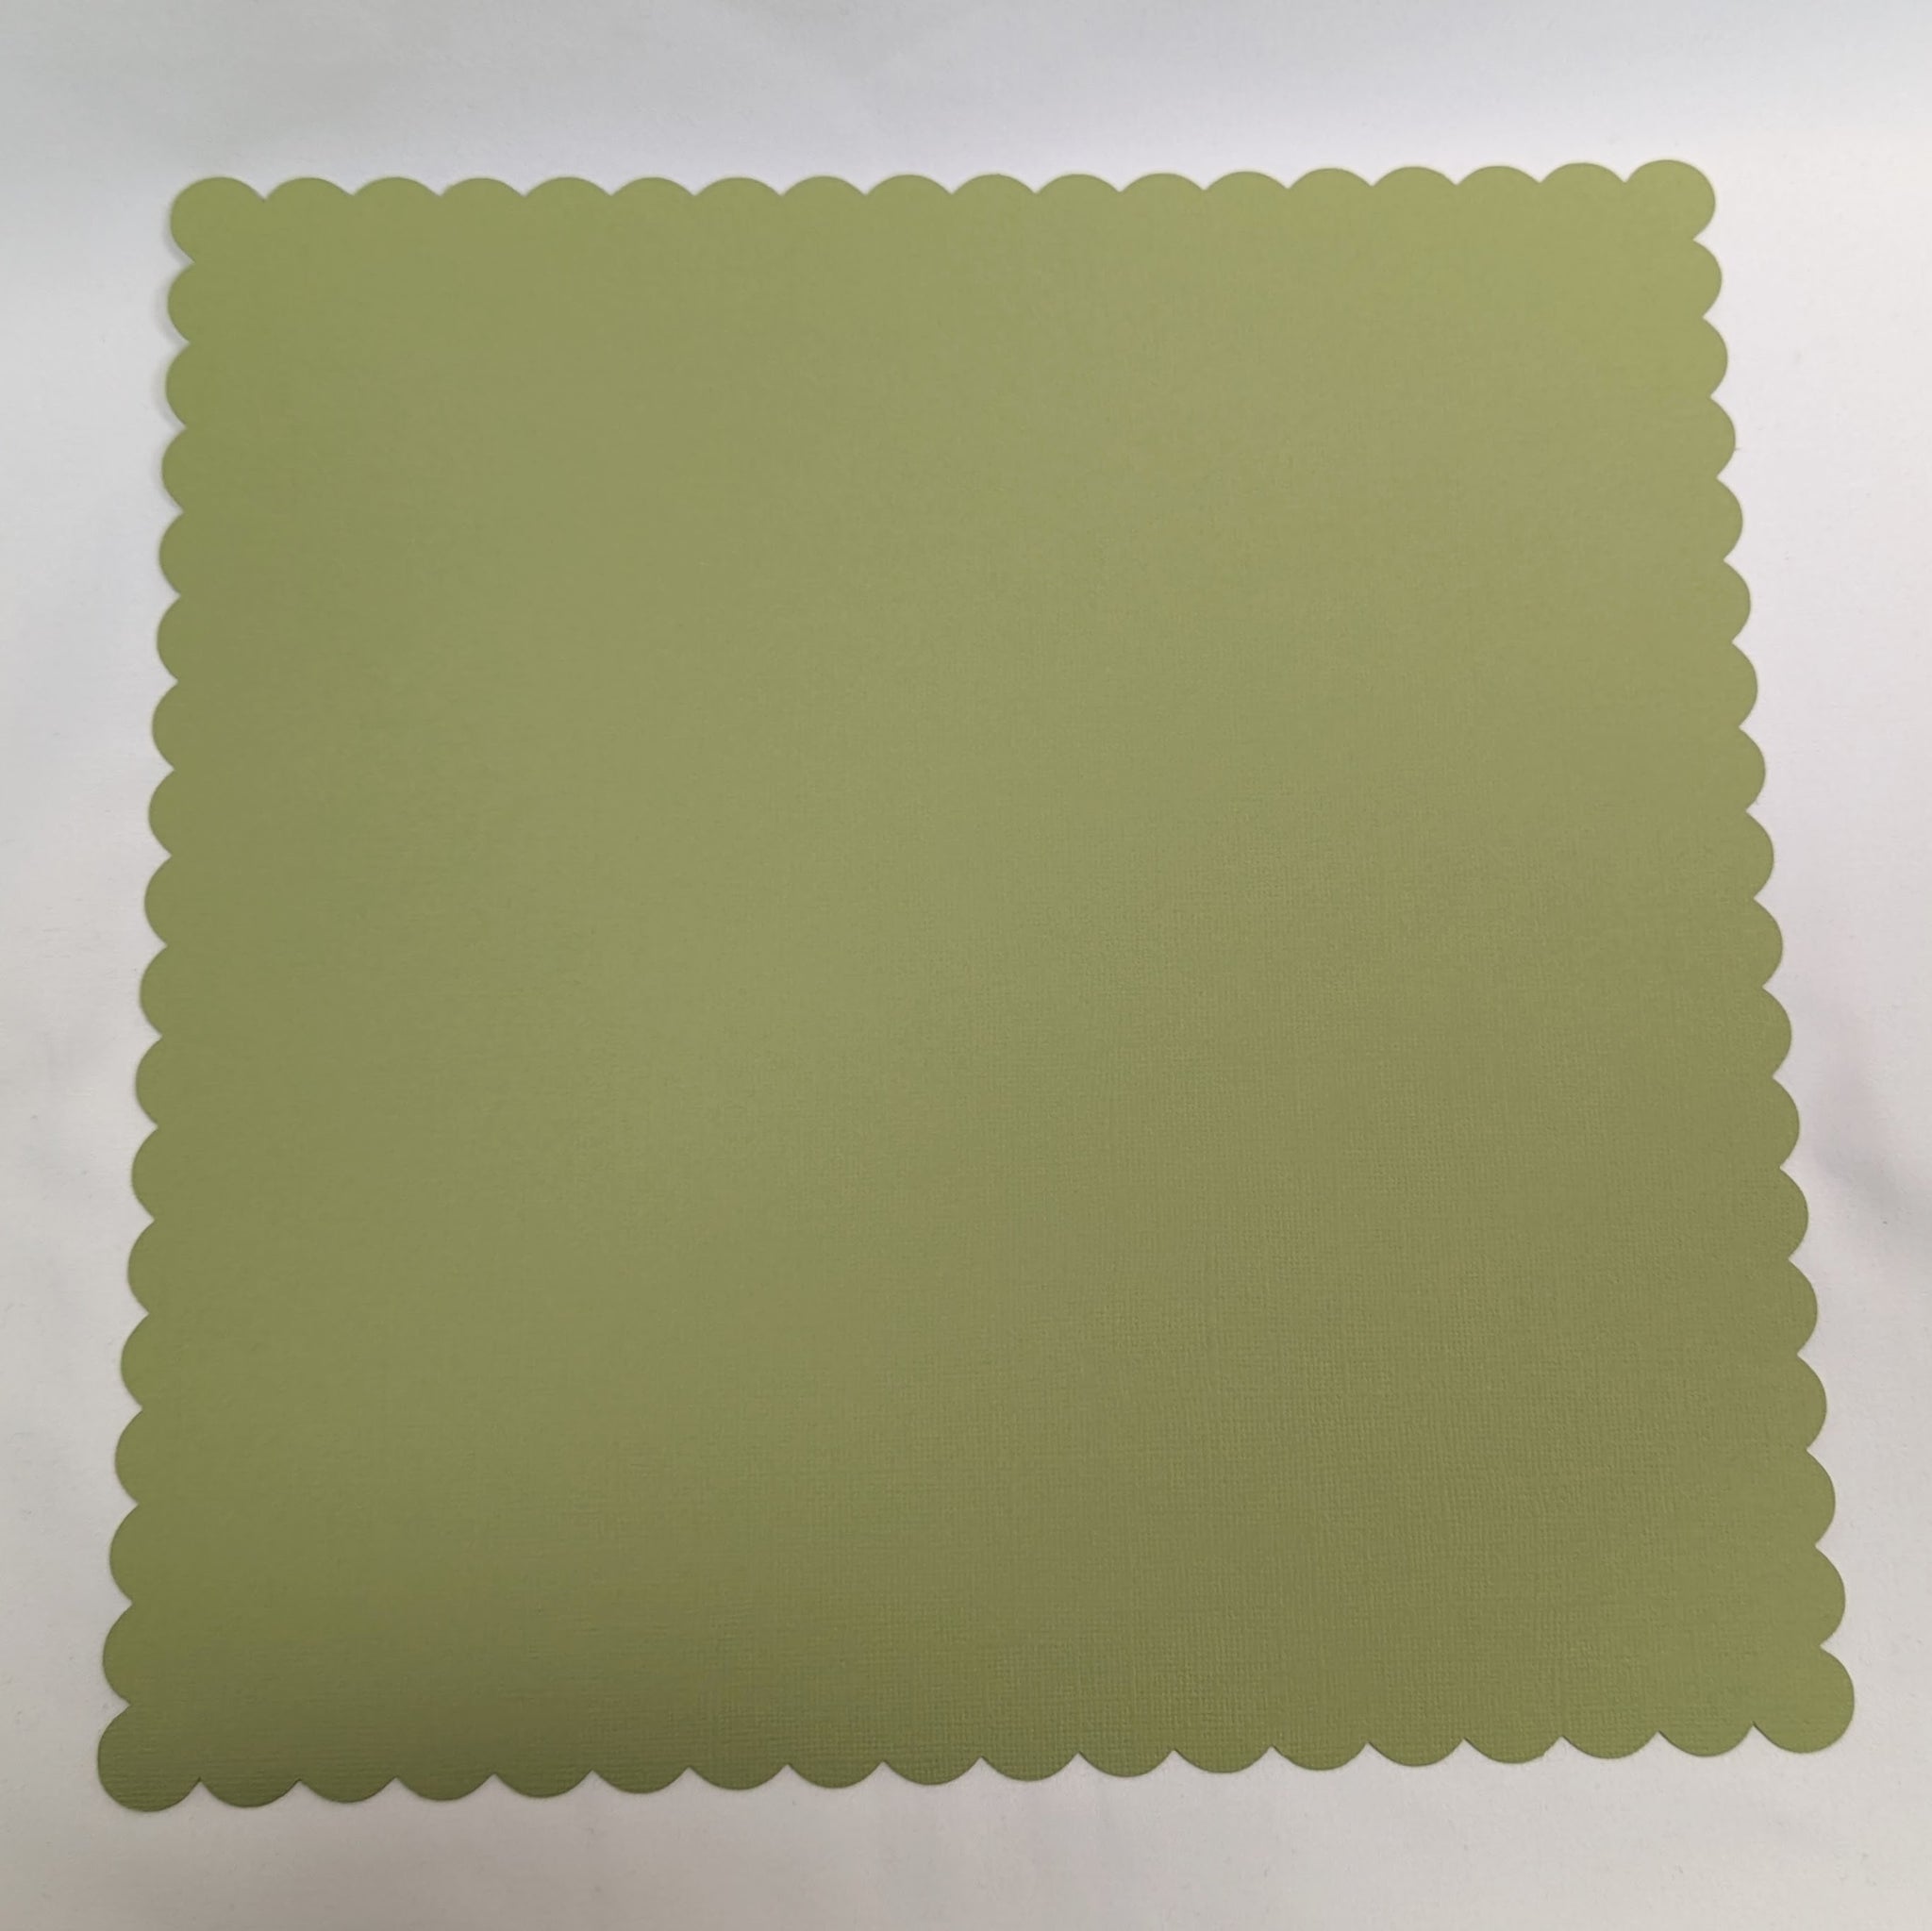 Green 12x12 Cardstock with a Scalloped Edge